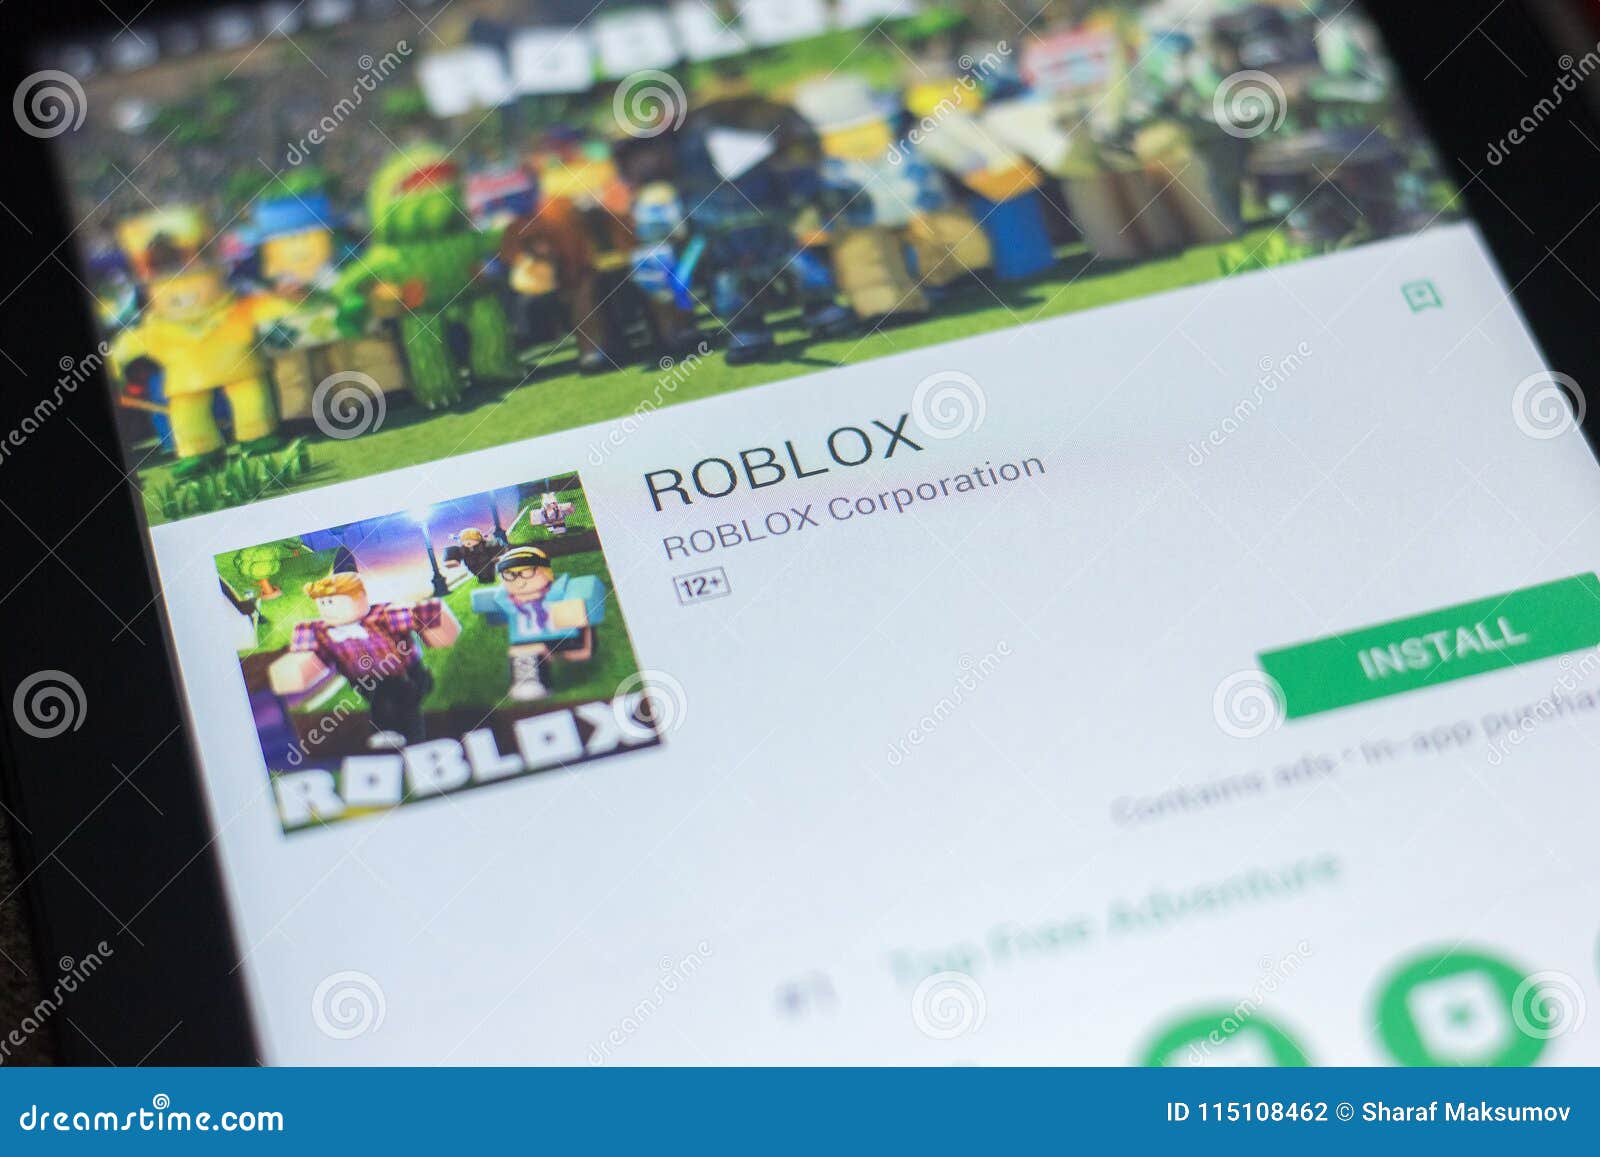 54 Roblox Photos Free Royalty Free Stock Photos From Dreamstime - 23 roblox application photos free royalty free stock photos from dreamstime